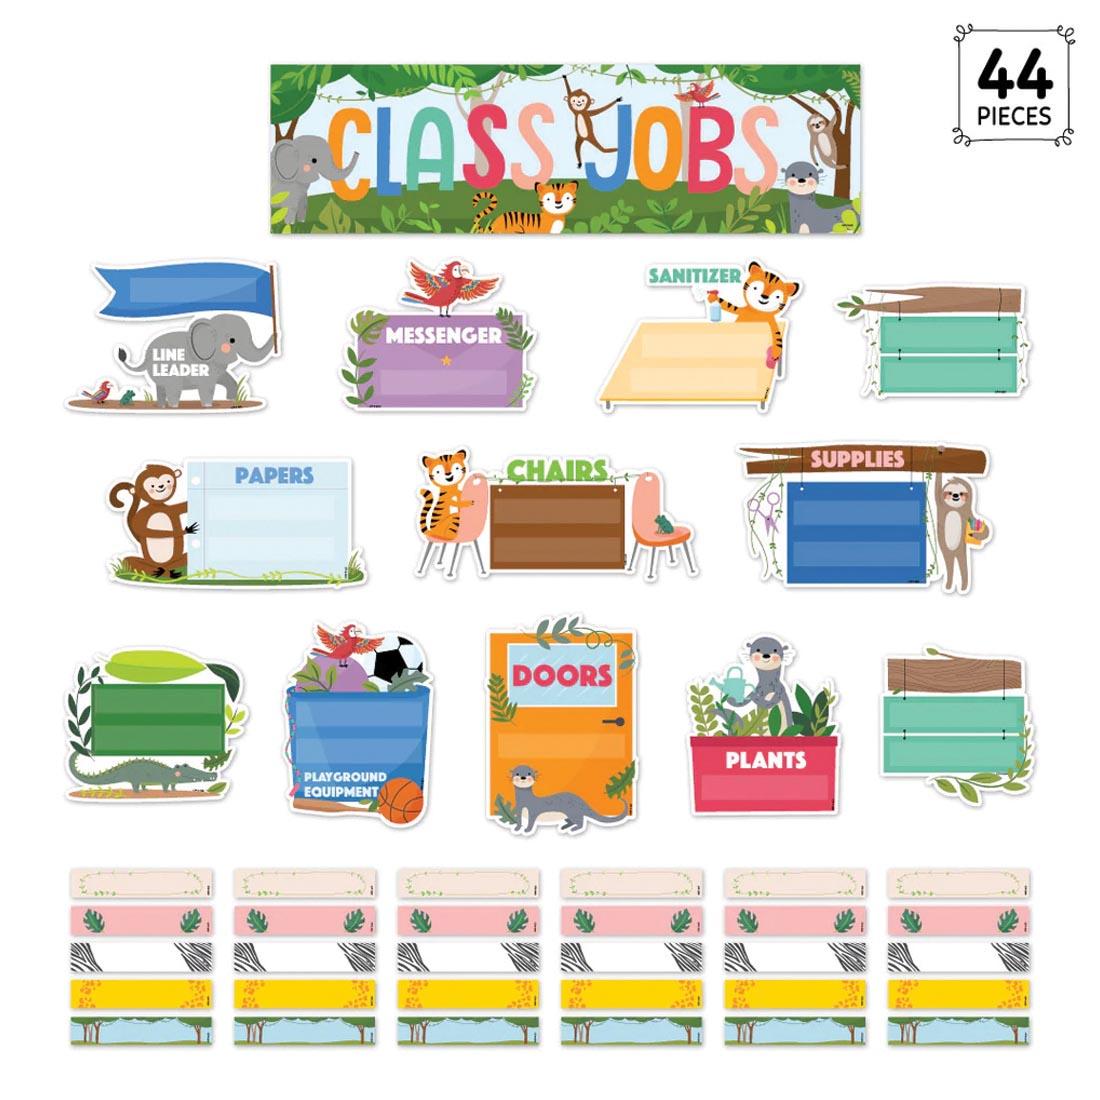 Class Jobs Mini Bulletin Board Set from the Jungle Friends collection by Creative Teaching Press with the text 44 PIECES